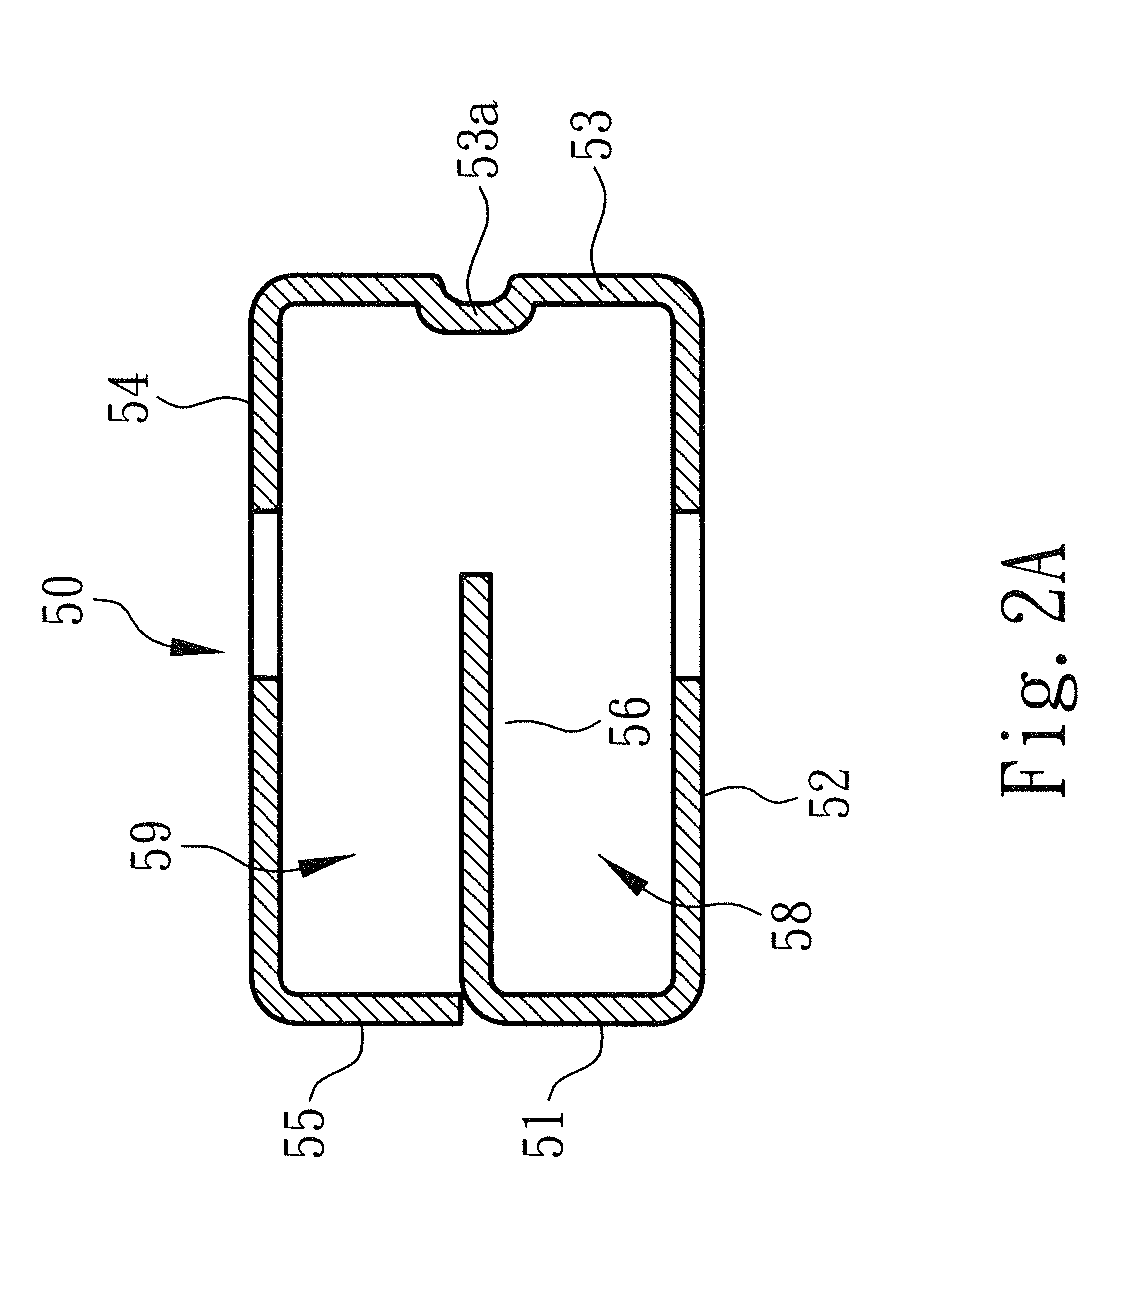 Switch wire connection device